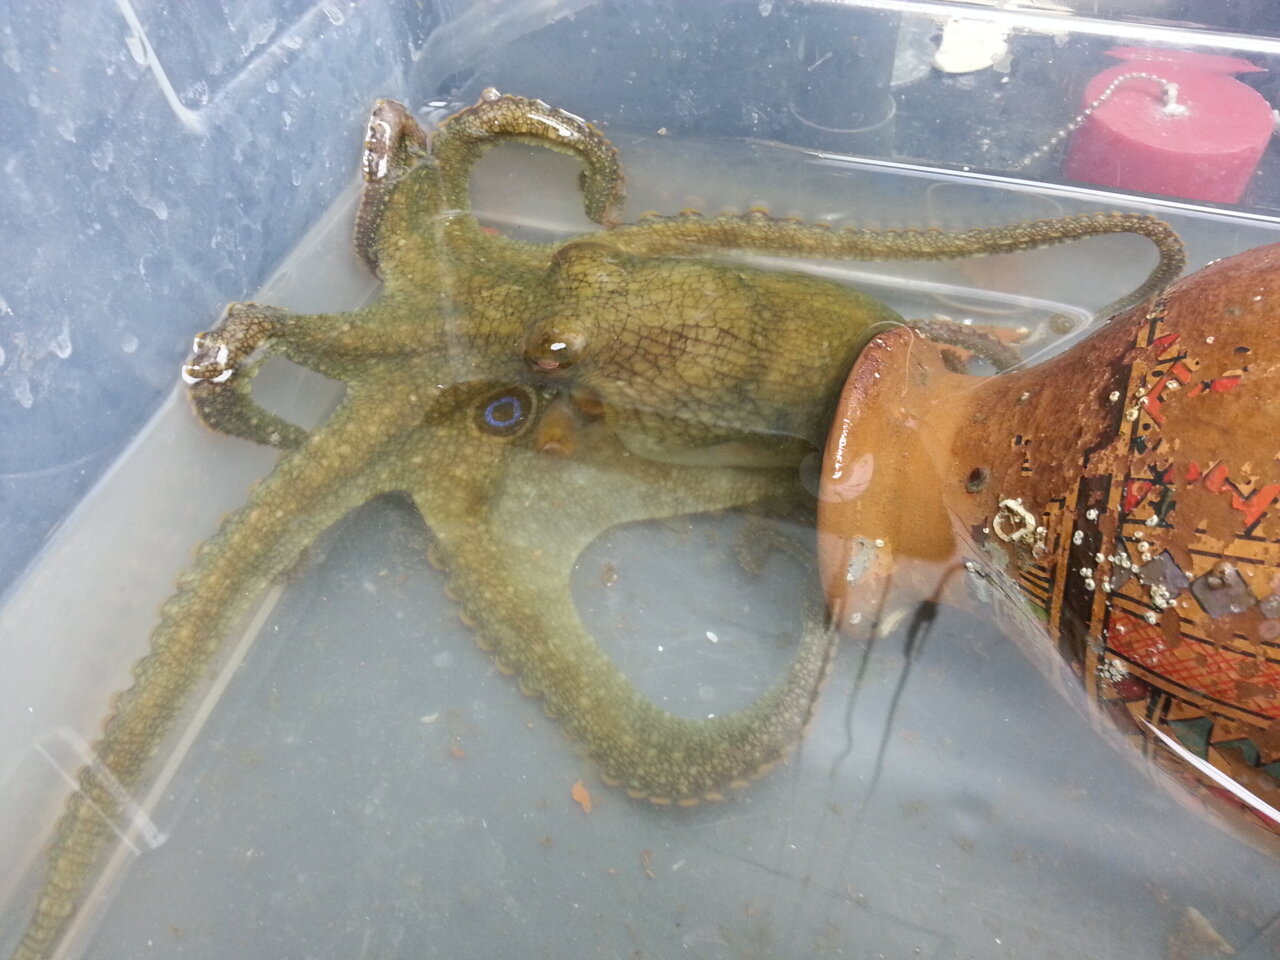 Changes in cholesterol production lead to tragic octopus death spiral